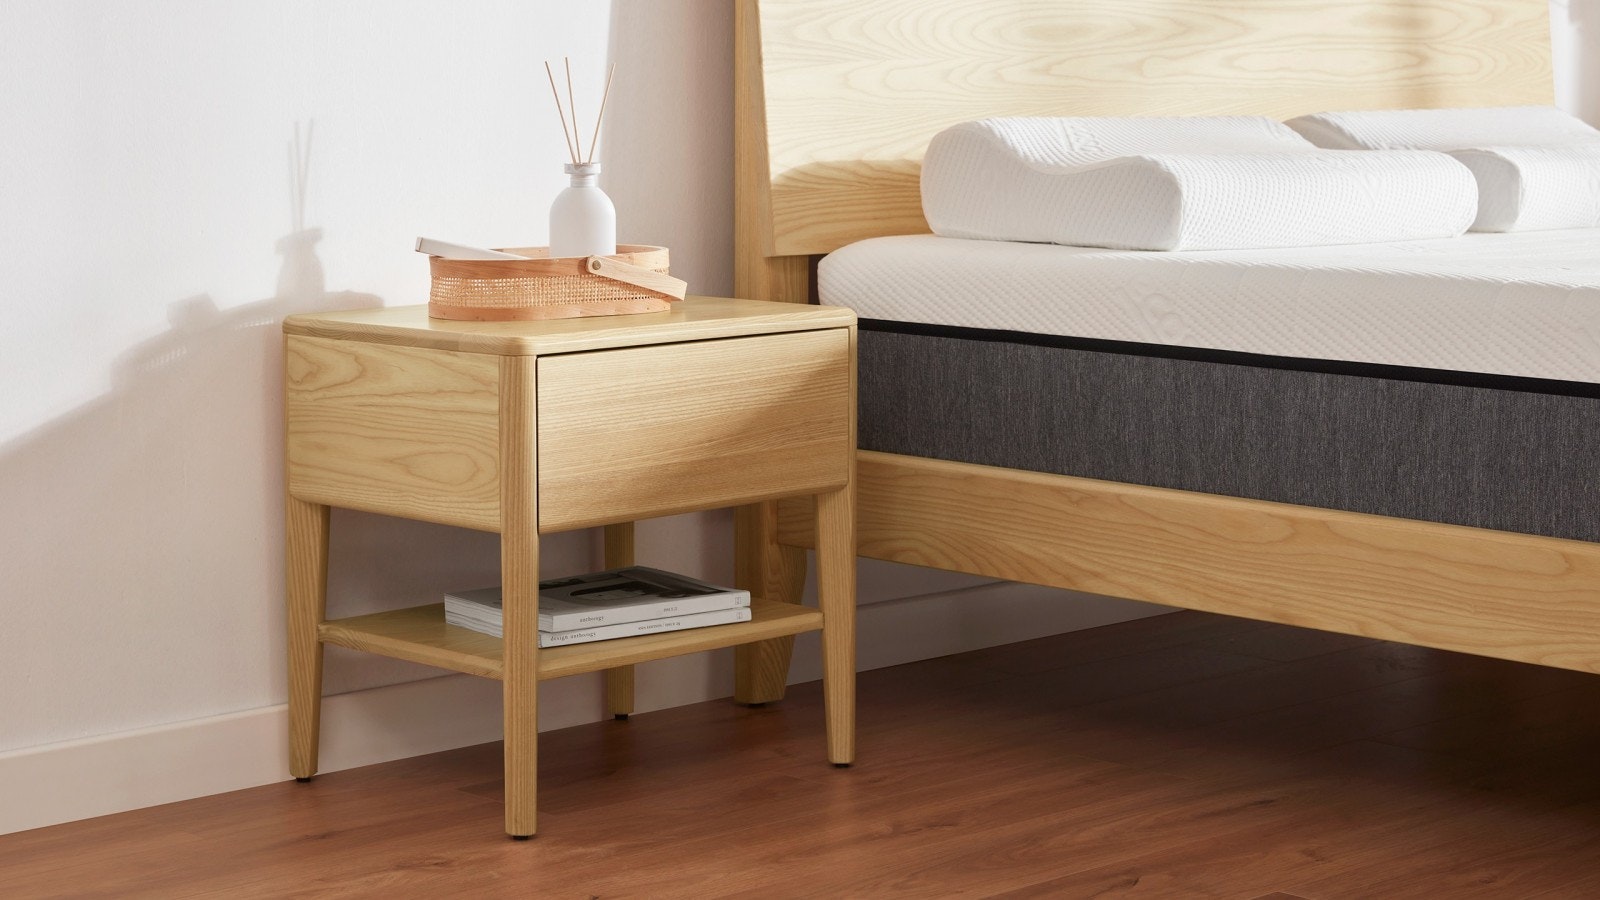 Capsule Bedside Table, Phone Cable Management